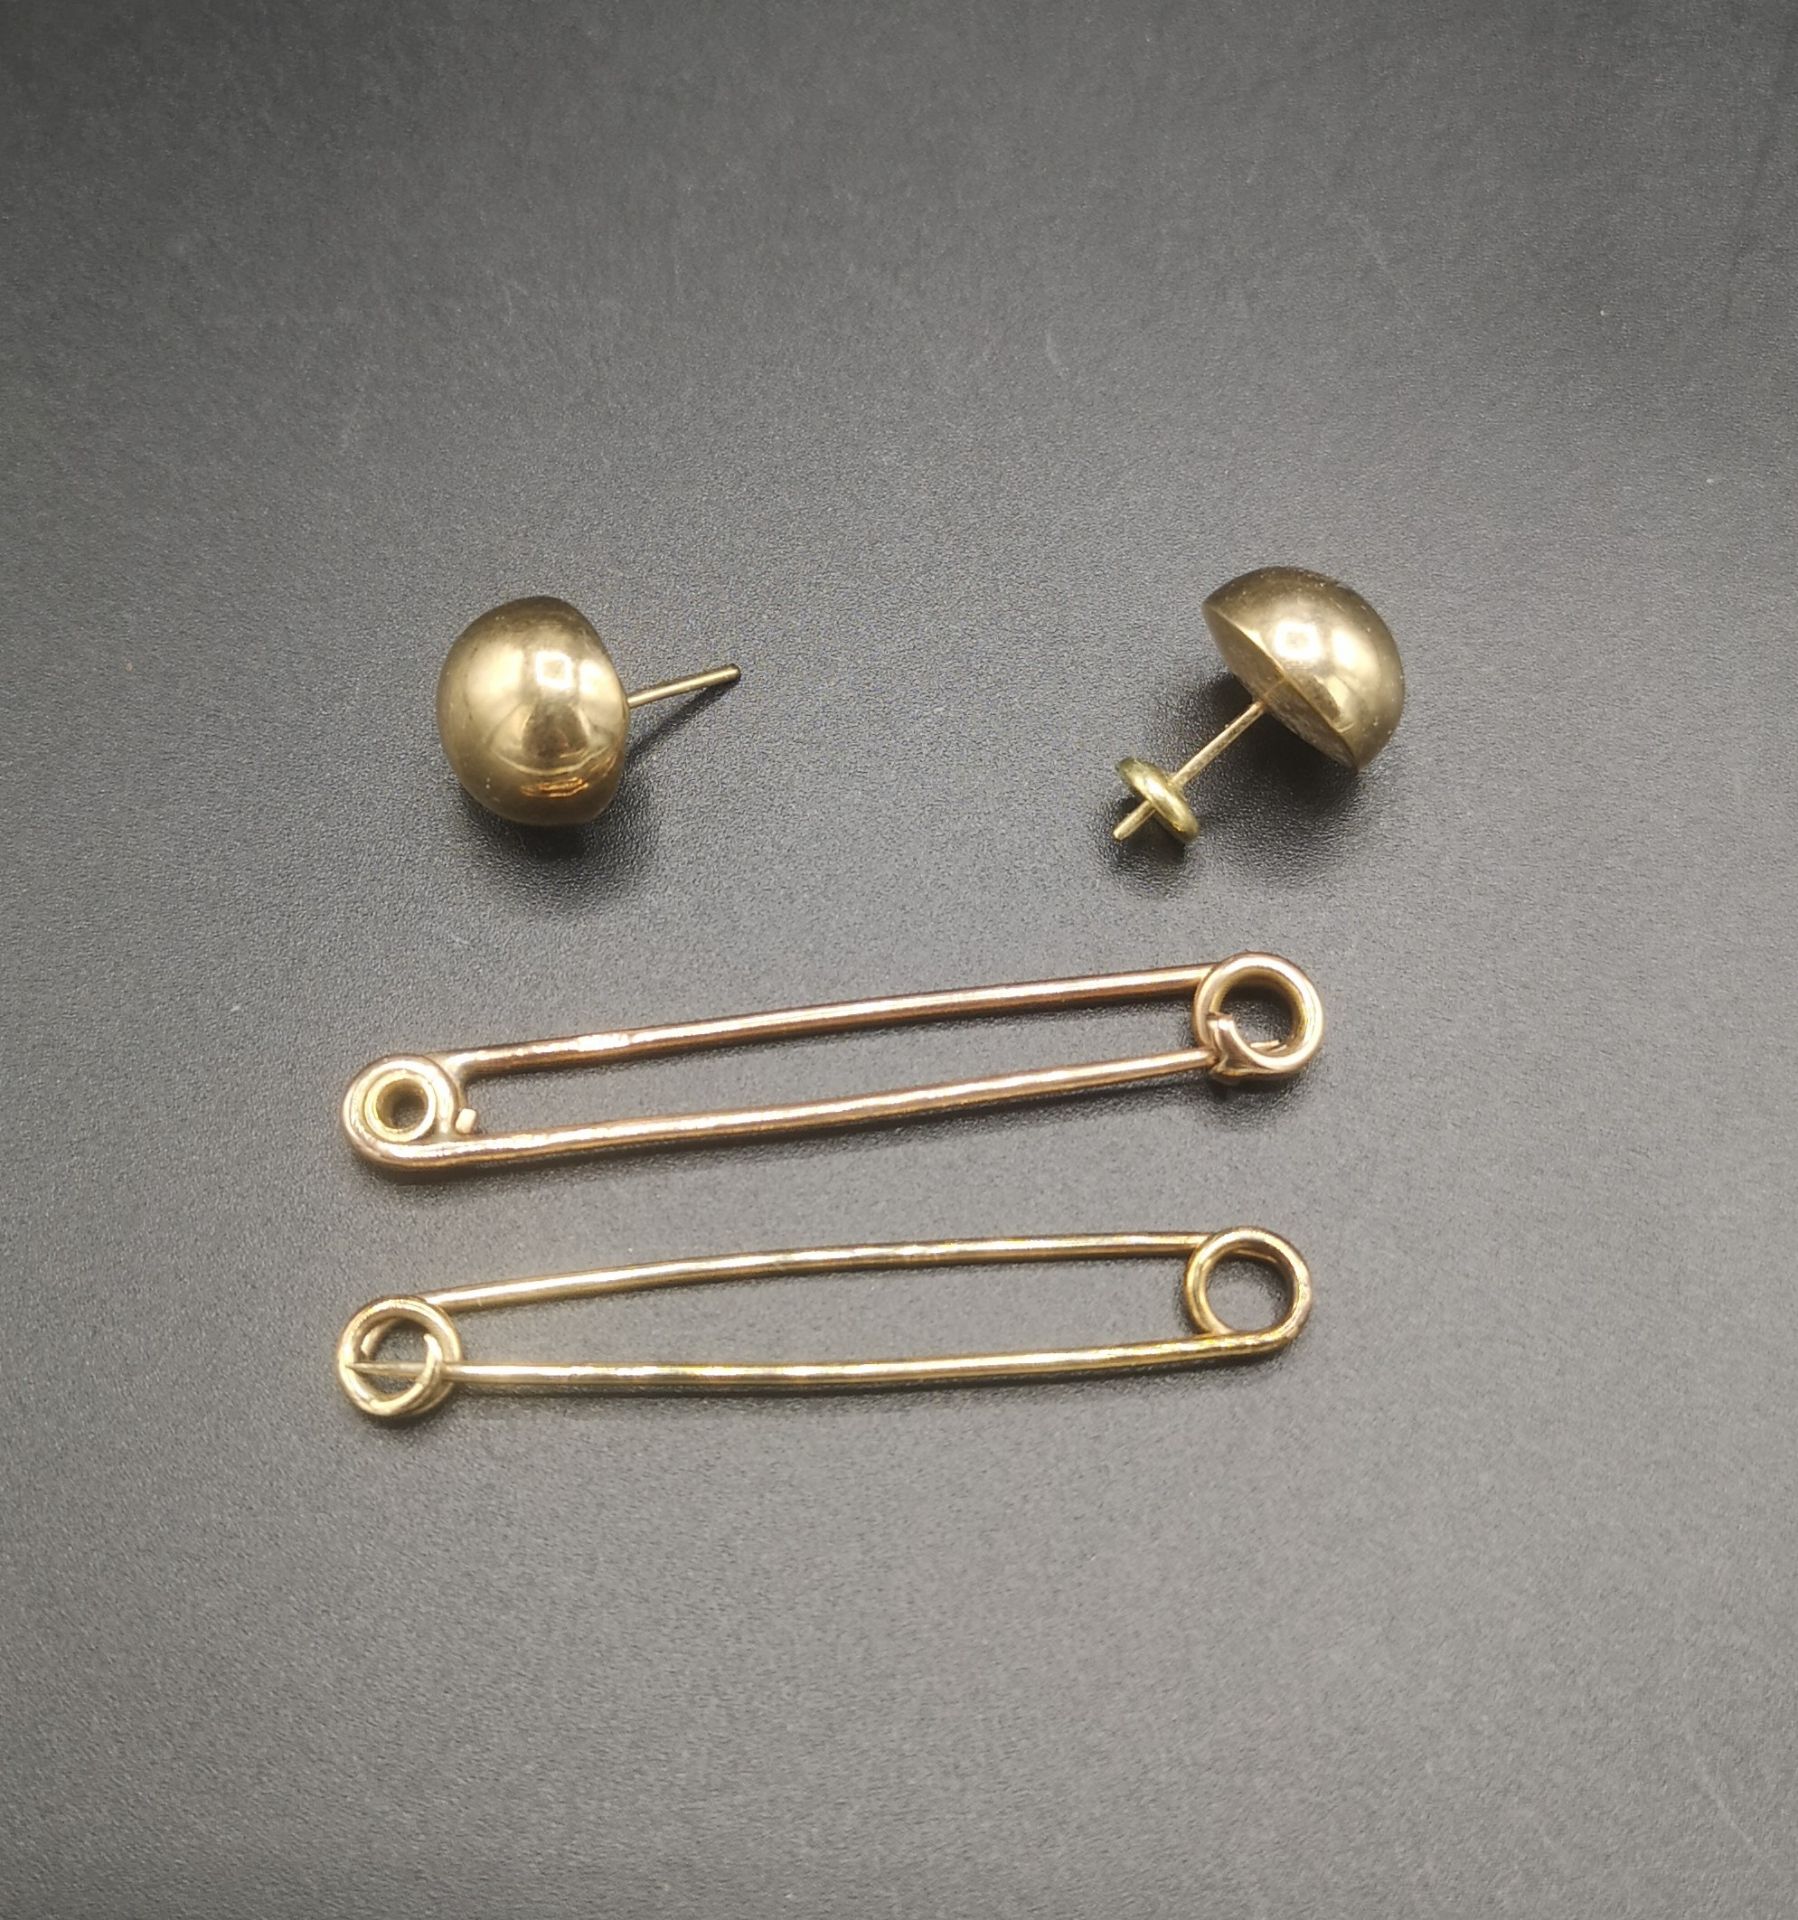 Pair of 9ct gold earrings together with a 9ct gold safety pin